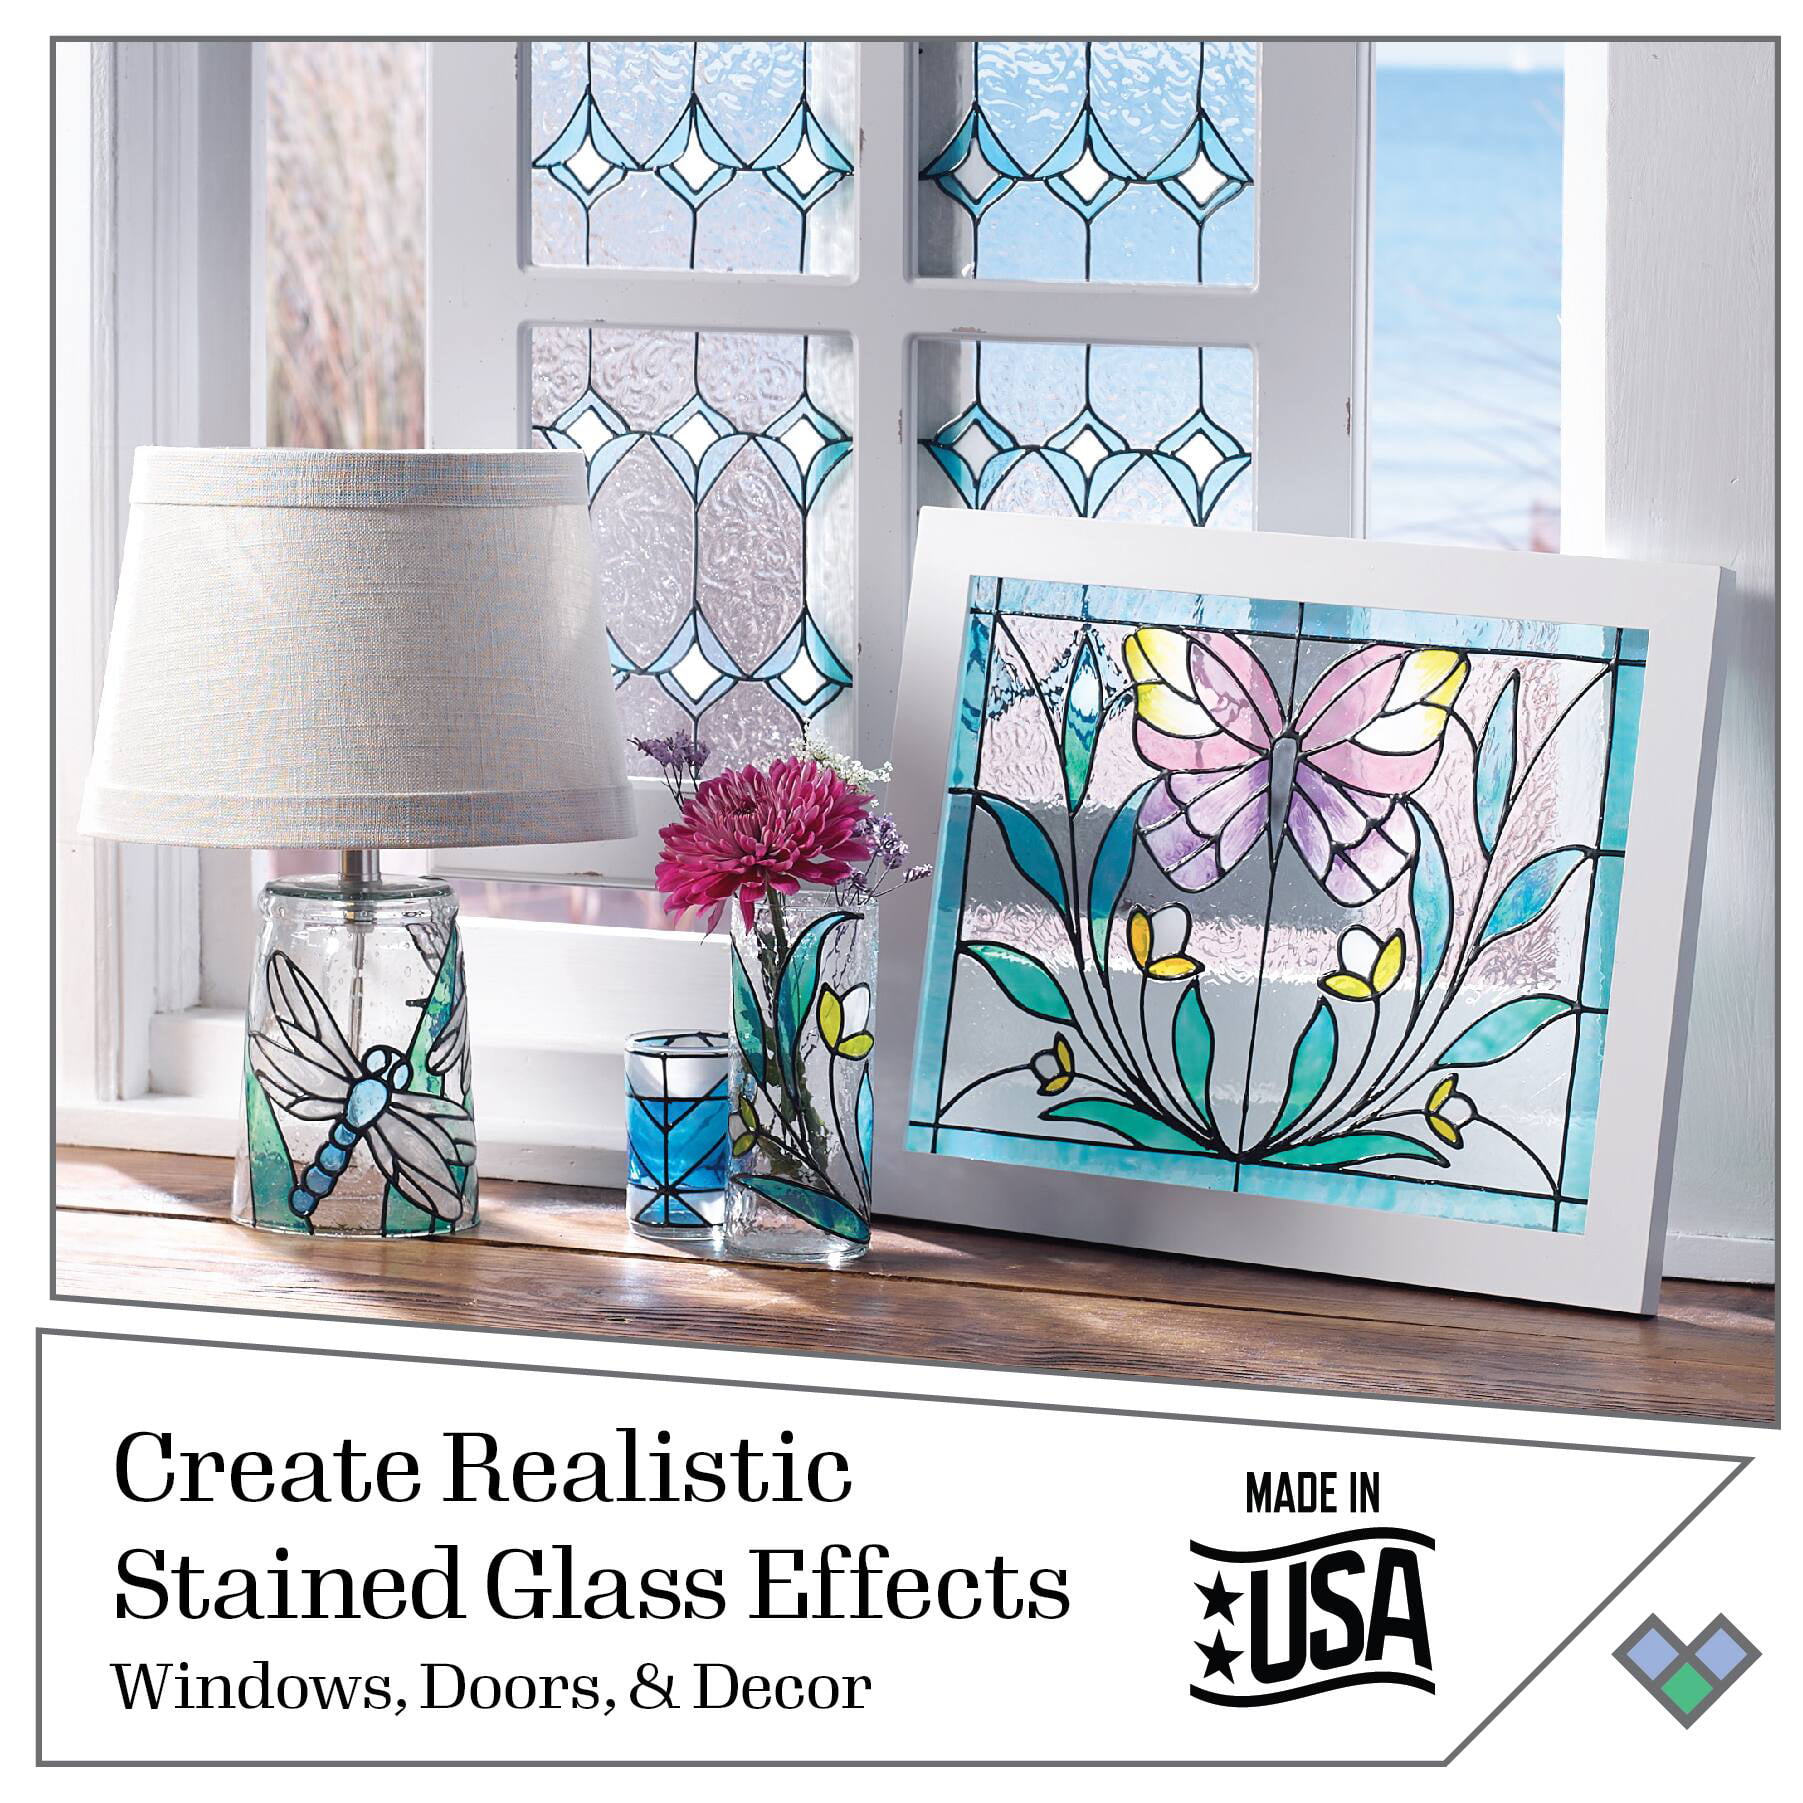 Shop Plaid Gallery Glass ® Stained Glass Effect Paint - Frost Clear, 2 oz.  - 19724 - 19724